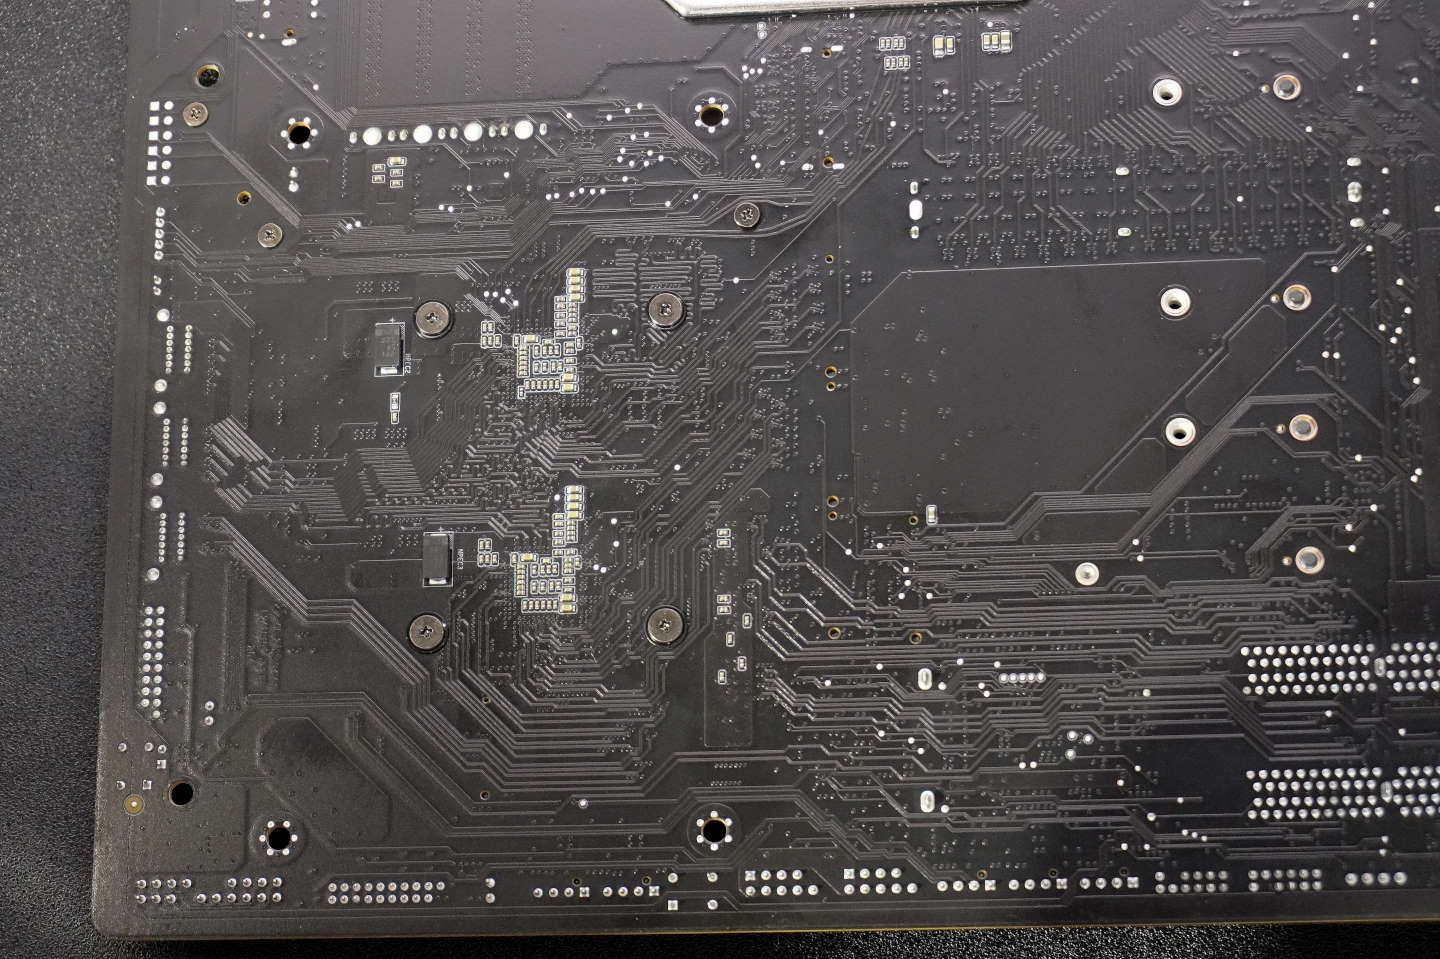 Although the author could not remove the heat sink of the motherboard at the exhibition site, but from the wiring and components on the back of the X670 Aero D, we can see that the X670 chipset is composed of two solid chips.